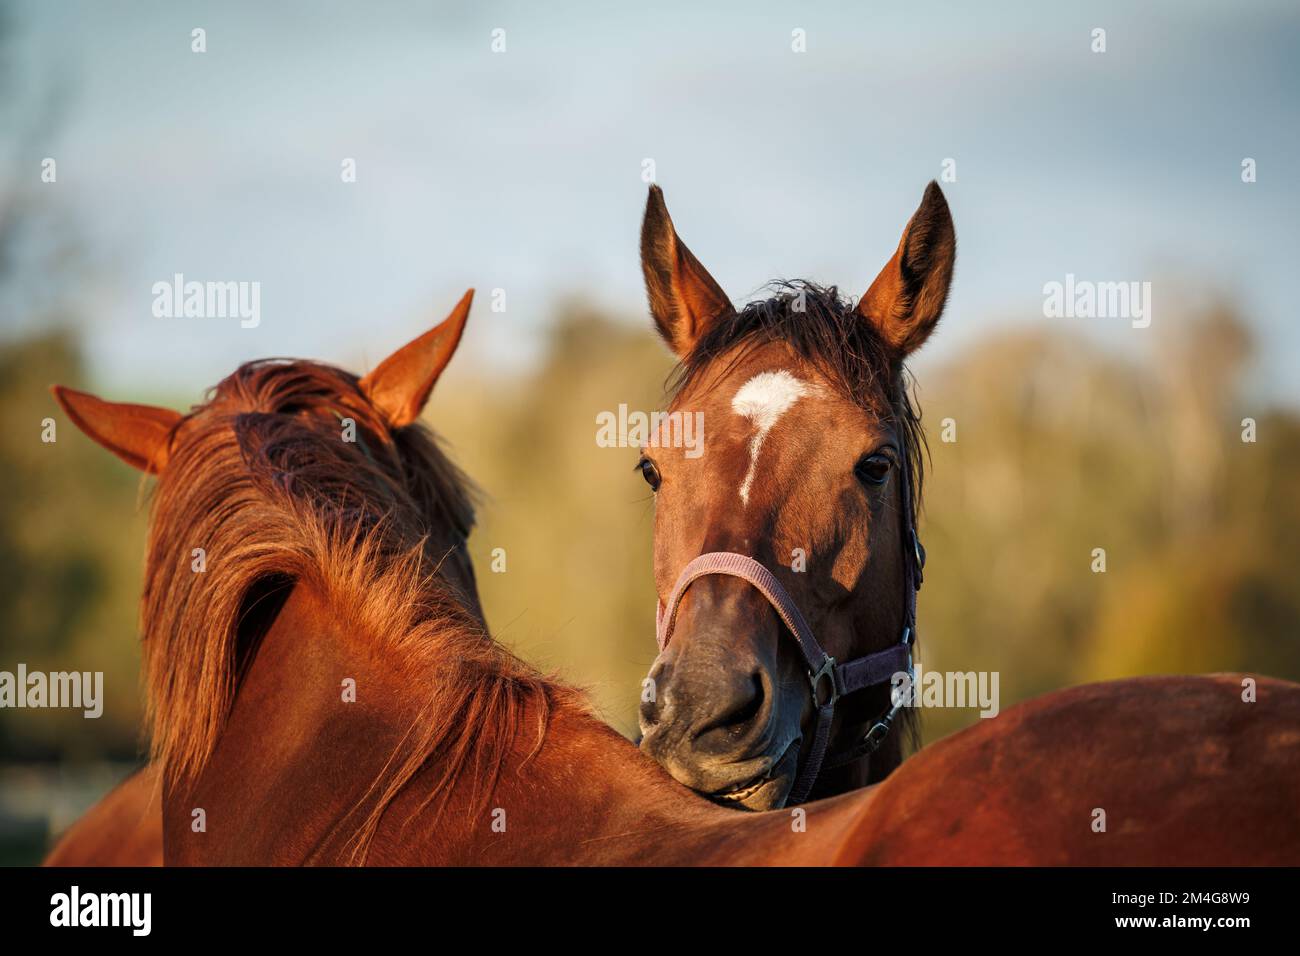 Two horses biting,scratching and grooming each other on pasture. Animal behavior Stock Photo